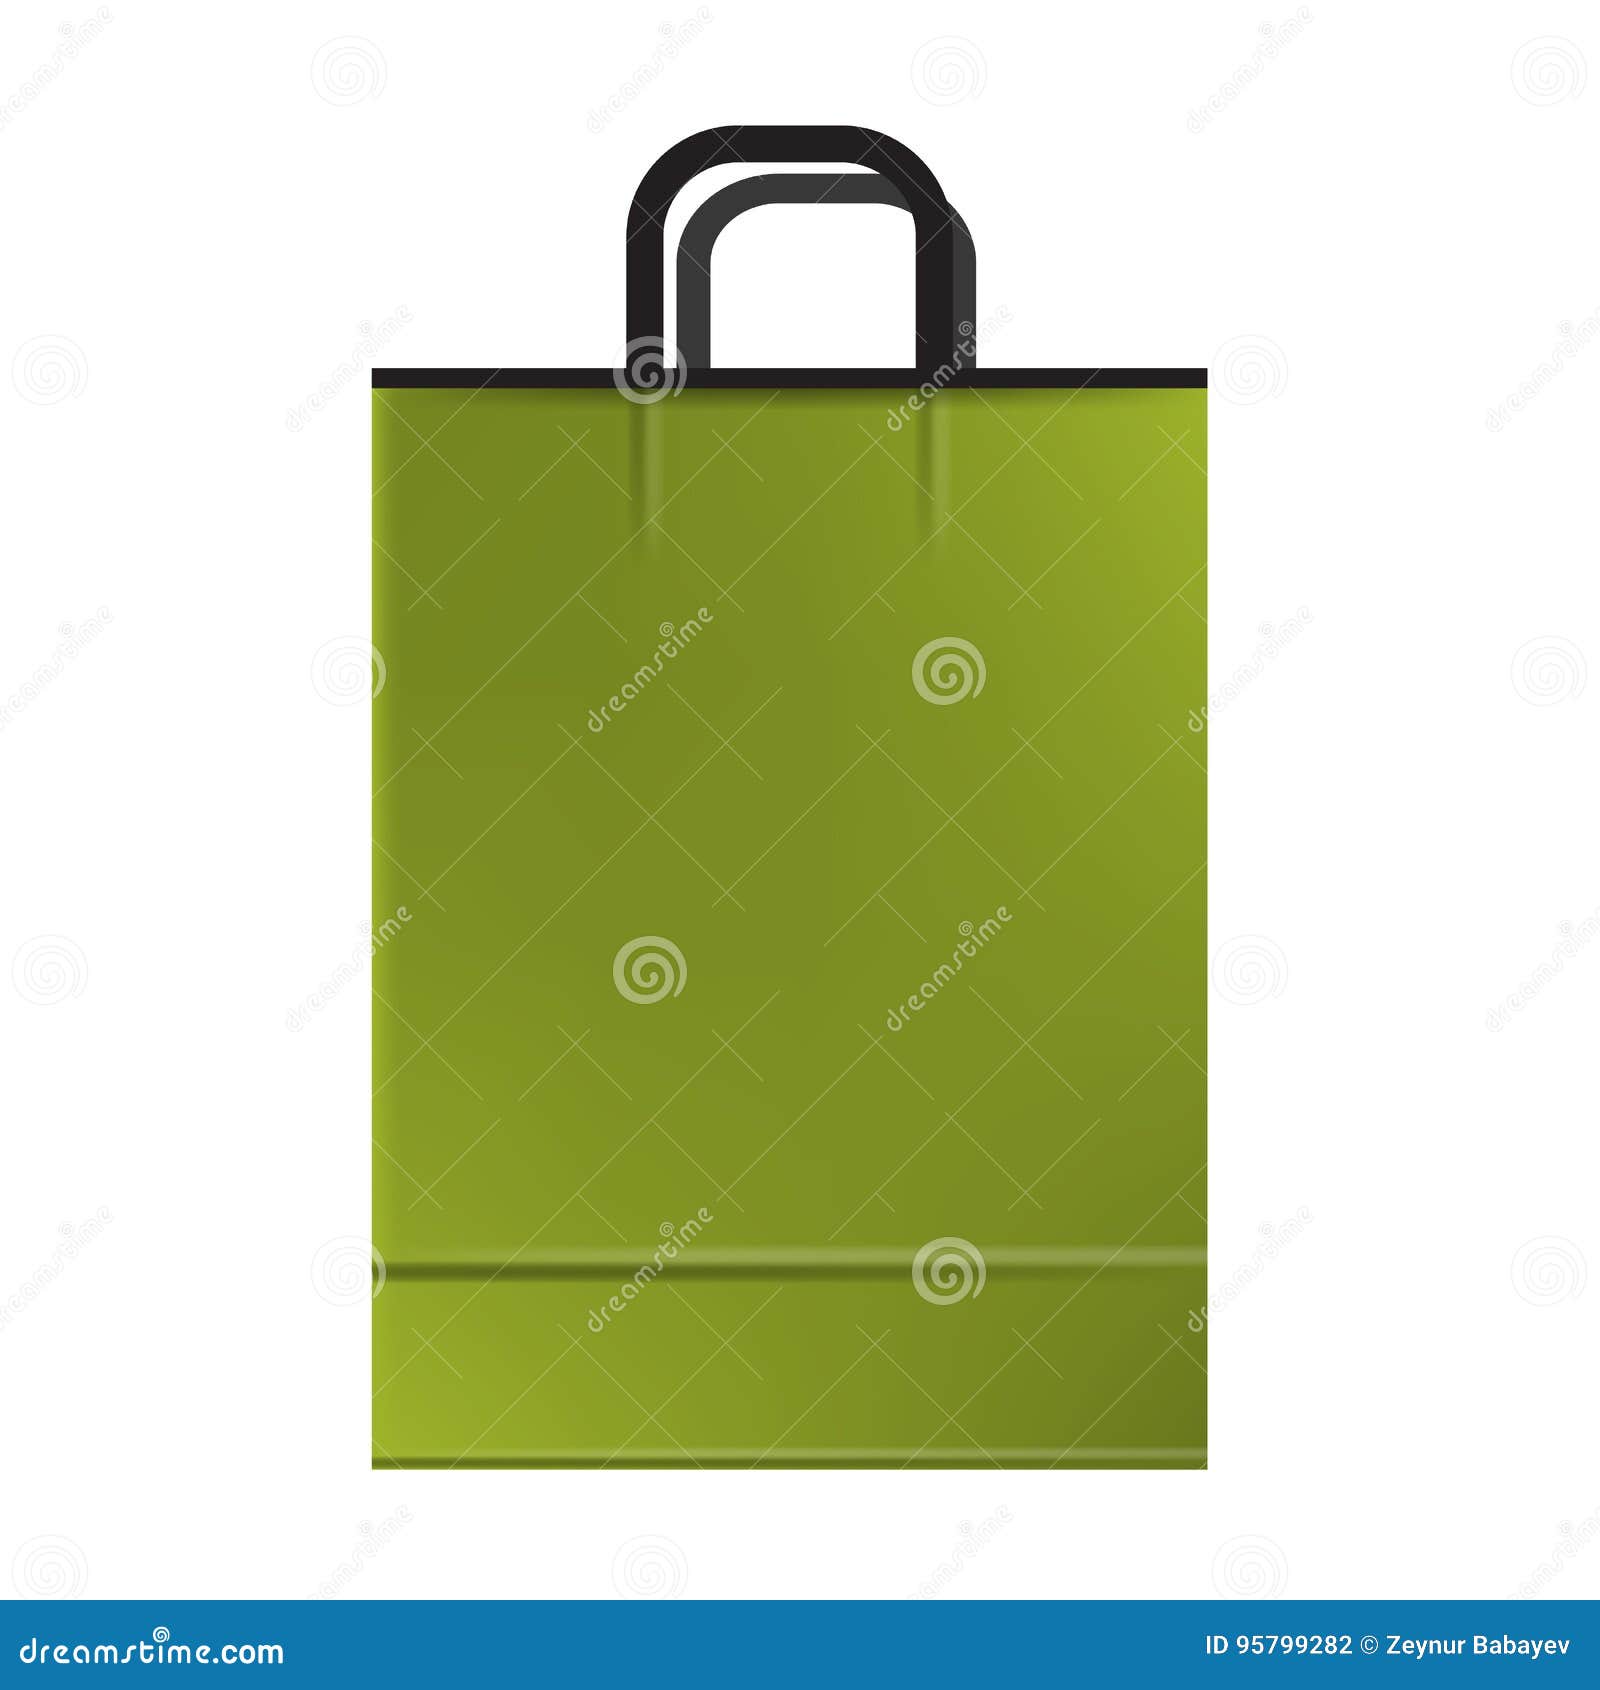 Download Green Empty Shopping Paper Bag. Ready To Use Mockup Vector ...